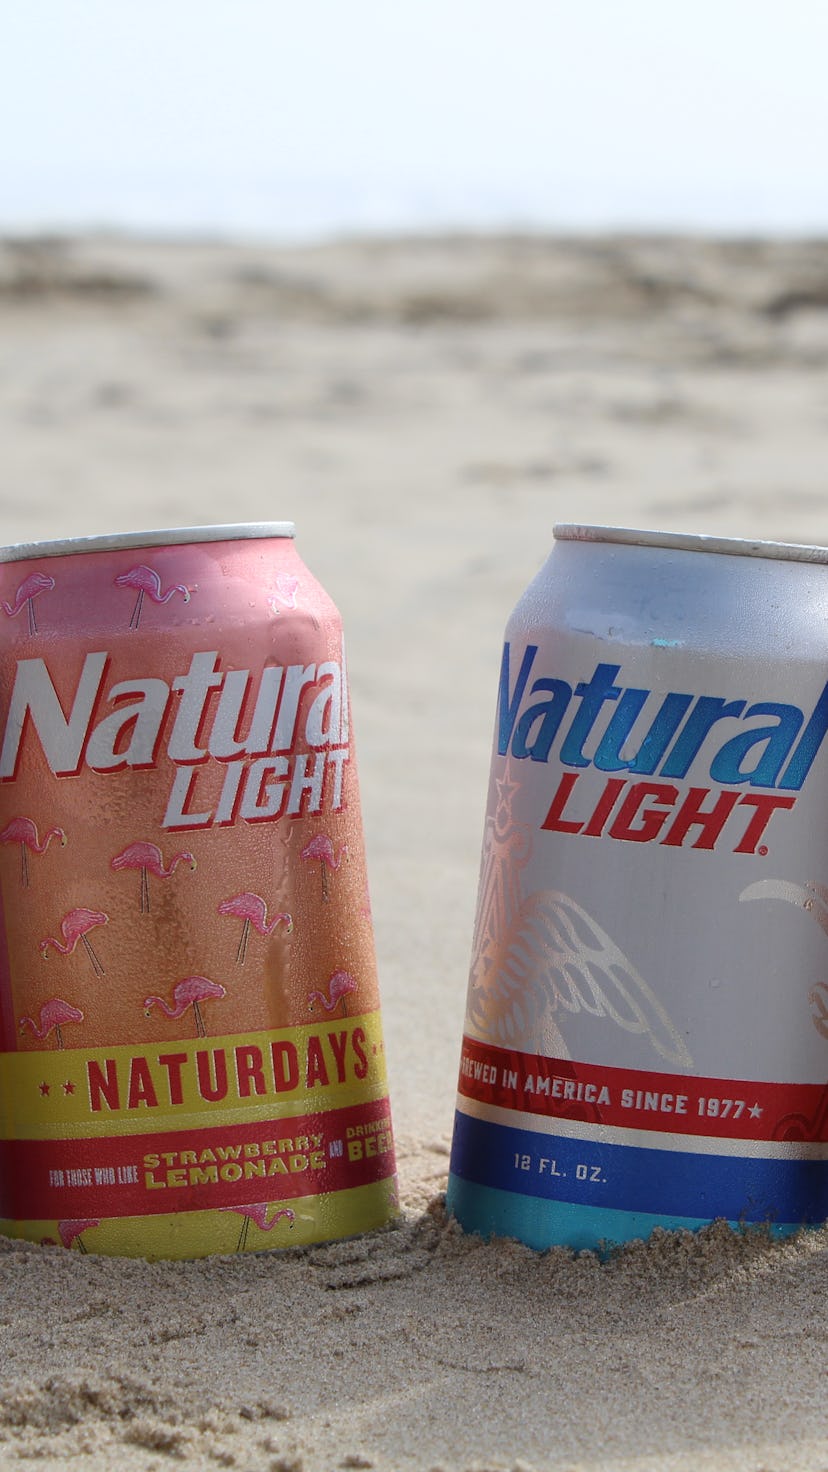 Natty Light introduced Naturdays beer line in 2019.